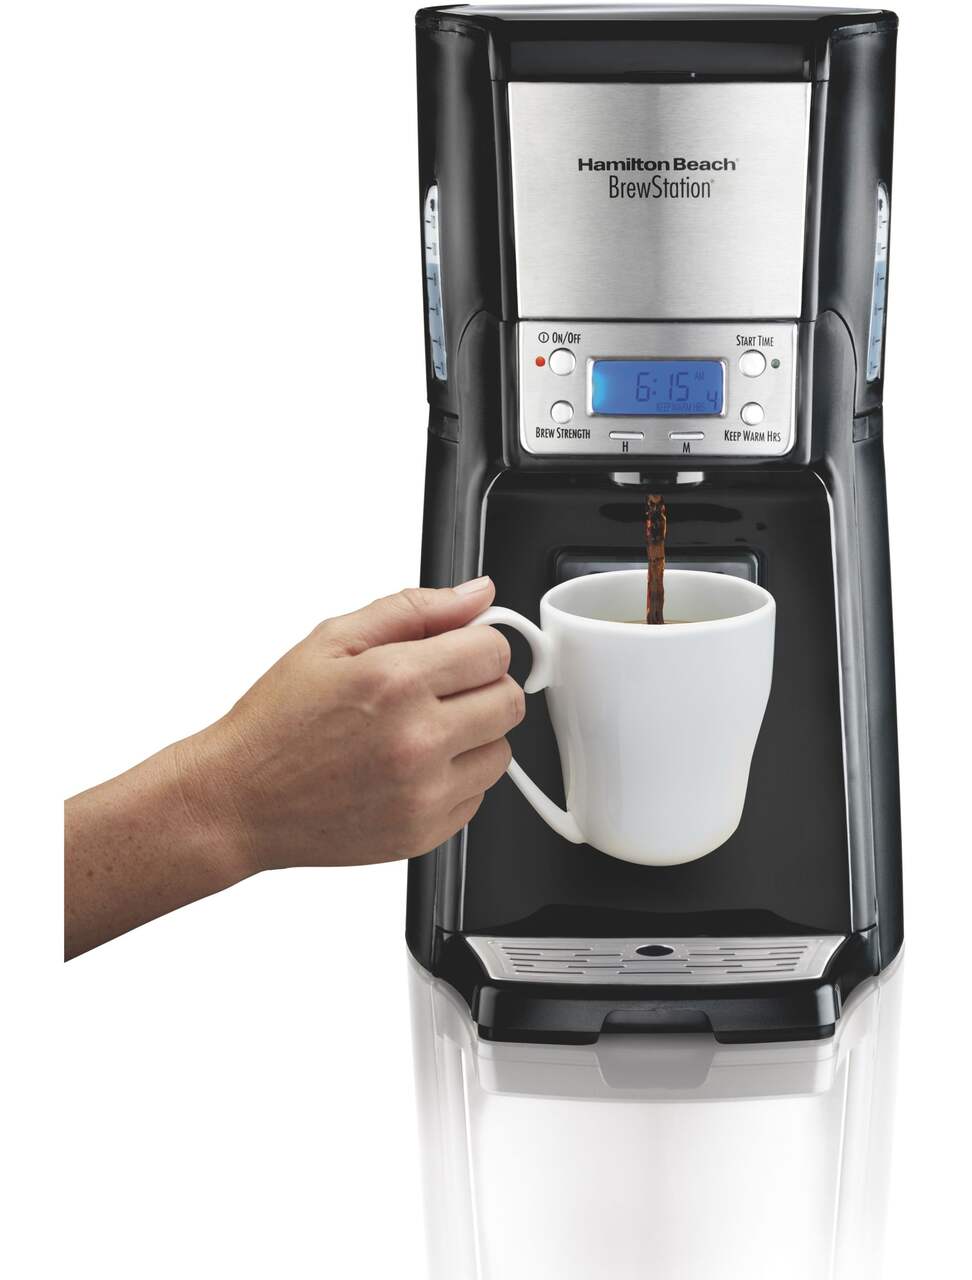 https://media-www.canadiantire.ca/product/living/kitchen/kitchen-appliances/0430509/hamilton-beach-brew-station-coffee-maker-6868b51f-8fde-4304-aa5e-820acf4d4050-jpgrendition.jpg?imdensity=1&imwidth=1244&impolicy=mZoom